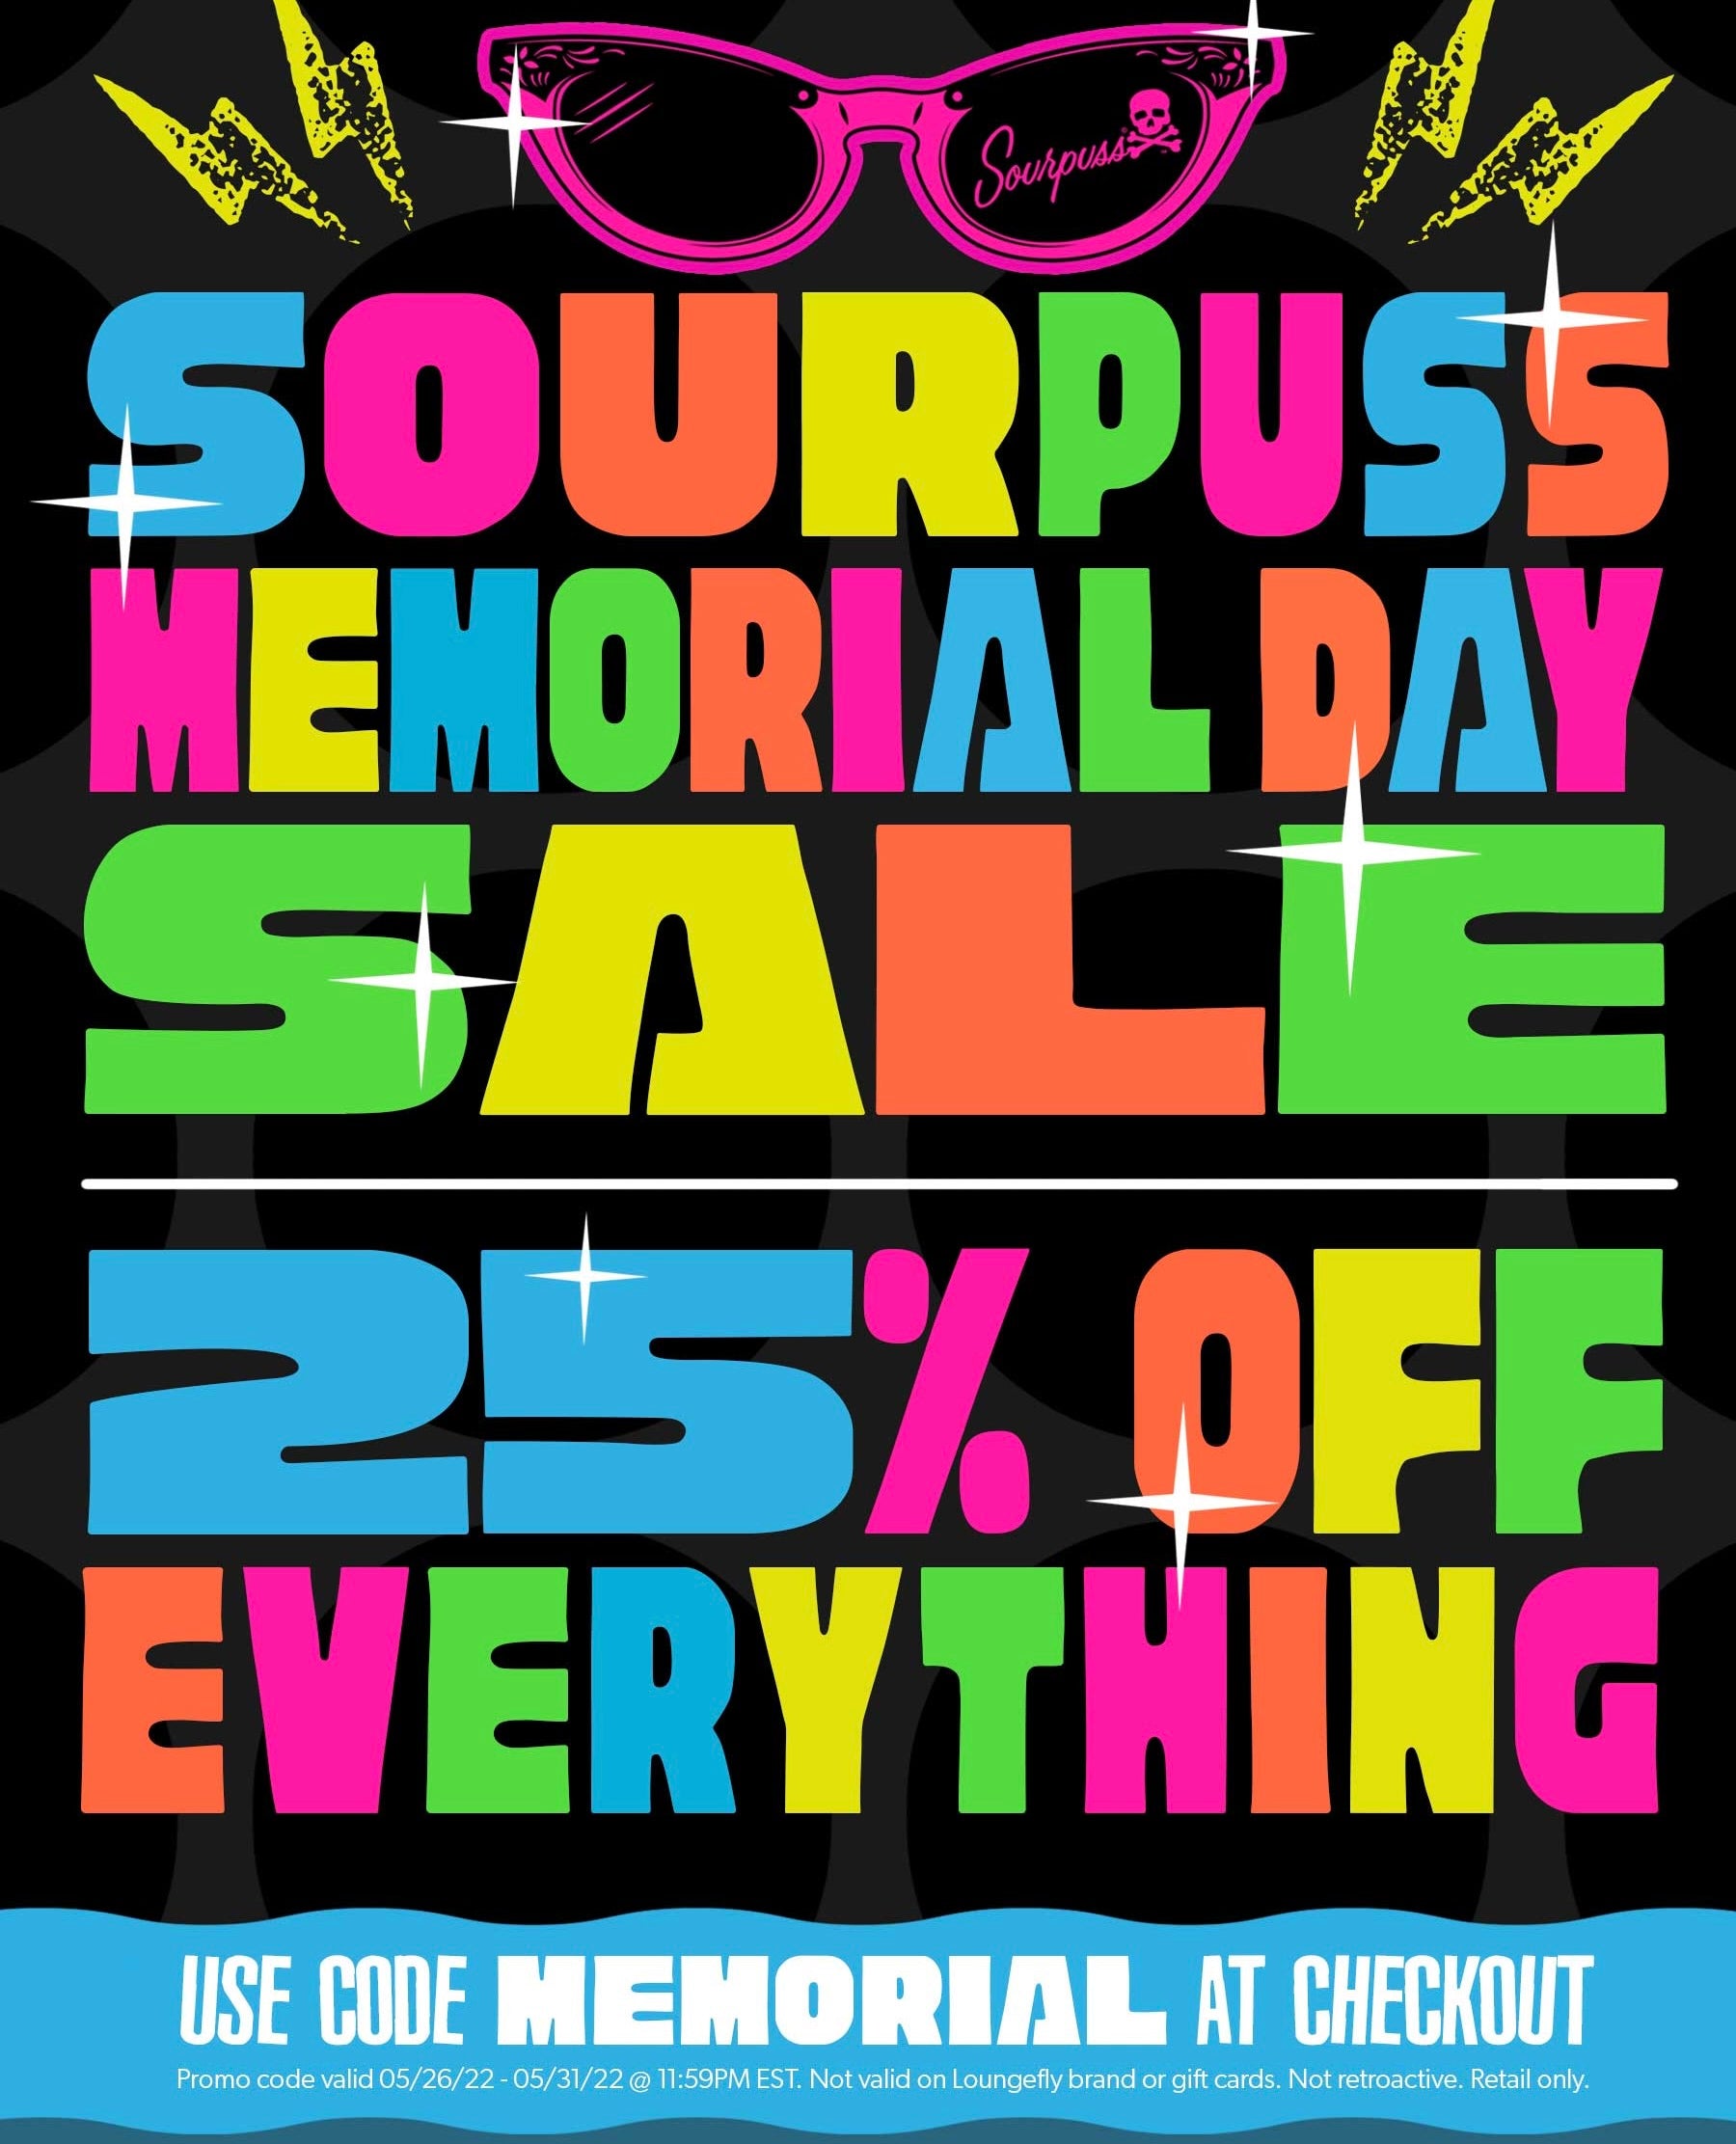 MEMORIAL DAY SALE IS HERE!